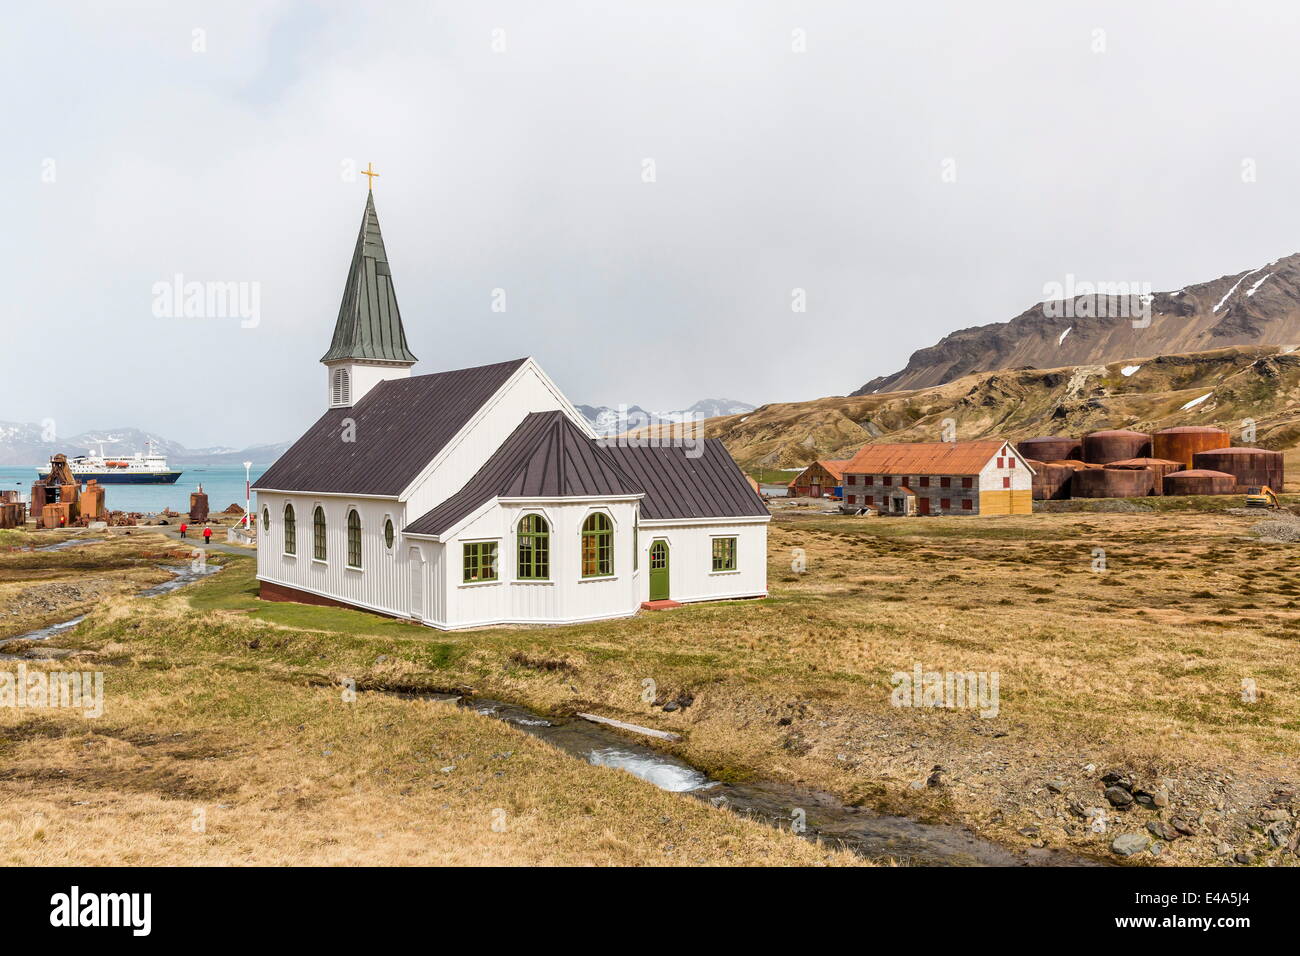 The abandoned and recently restored whaling station at Grytviken, South Georgia, UK Overseas Protectorate, Polar Regions Stock Photo